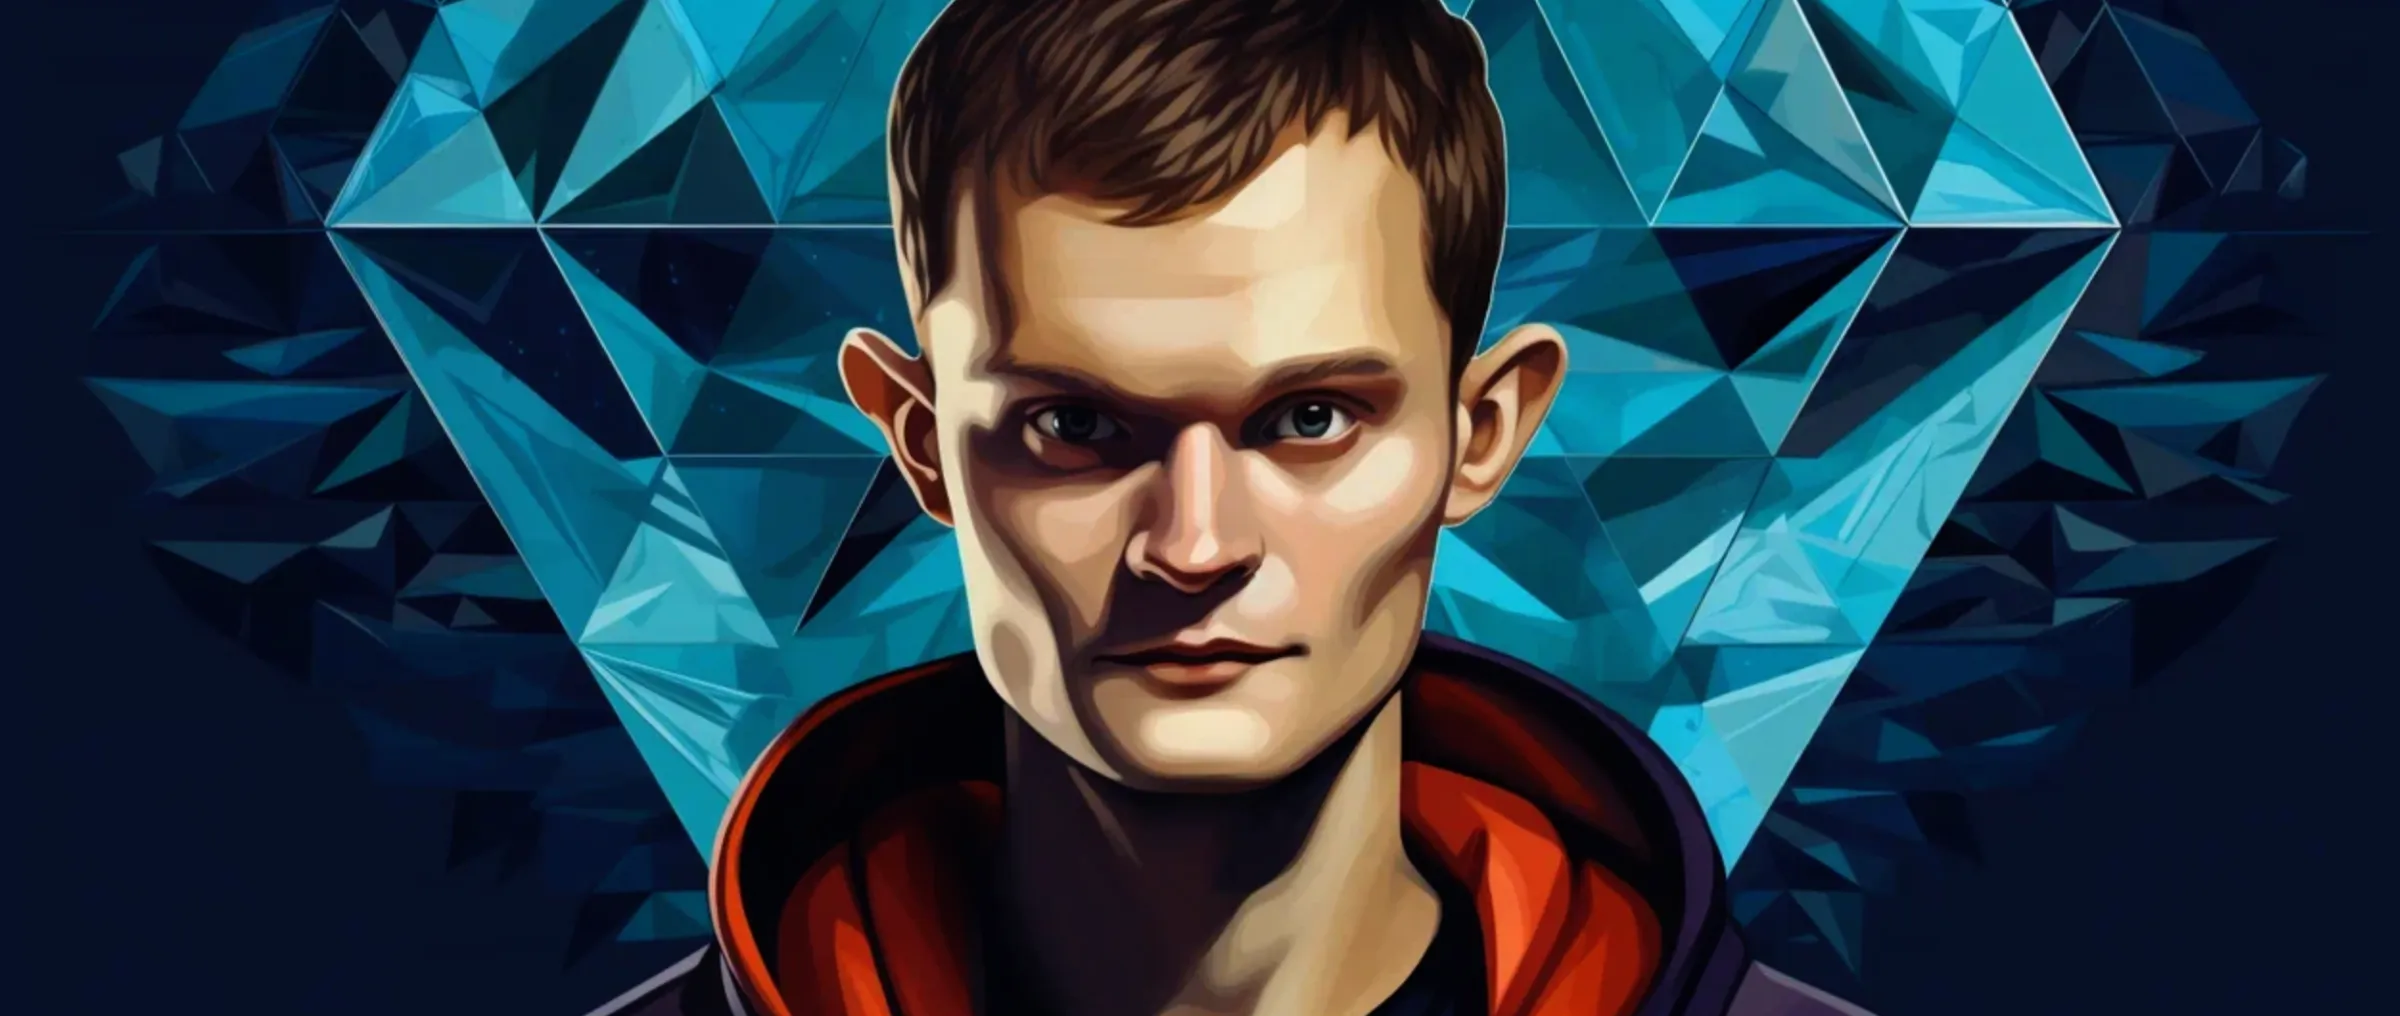 Vitalik Buterin: “I was pleasantly surprised by how successful SHIB tokens performed.”